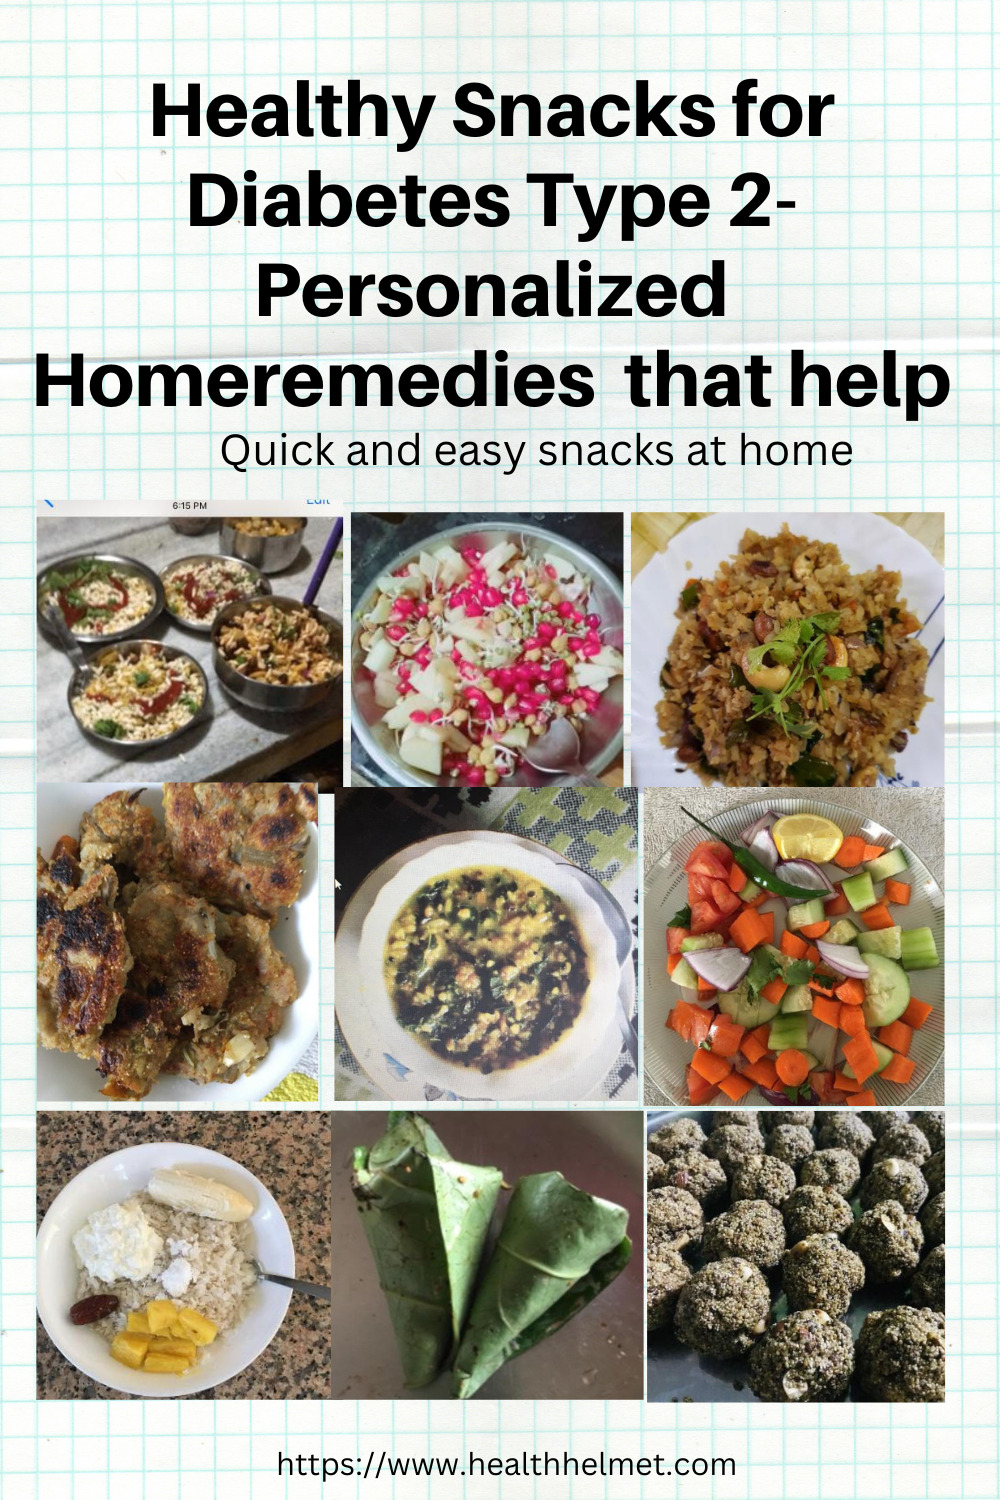 Healthy-Homemade-Snacks-Personalized-Homeremedes-for-Diabetes-Type-2